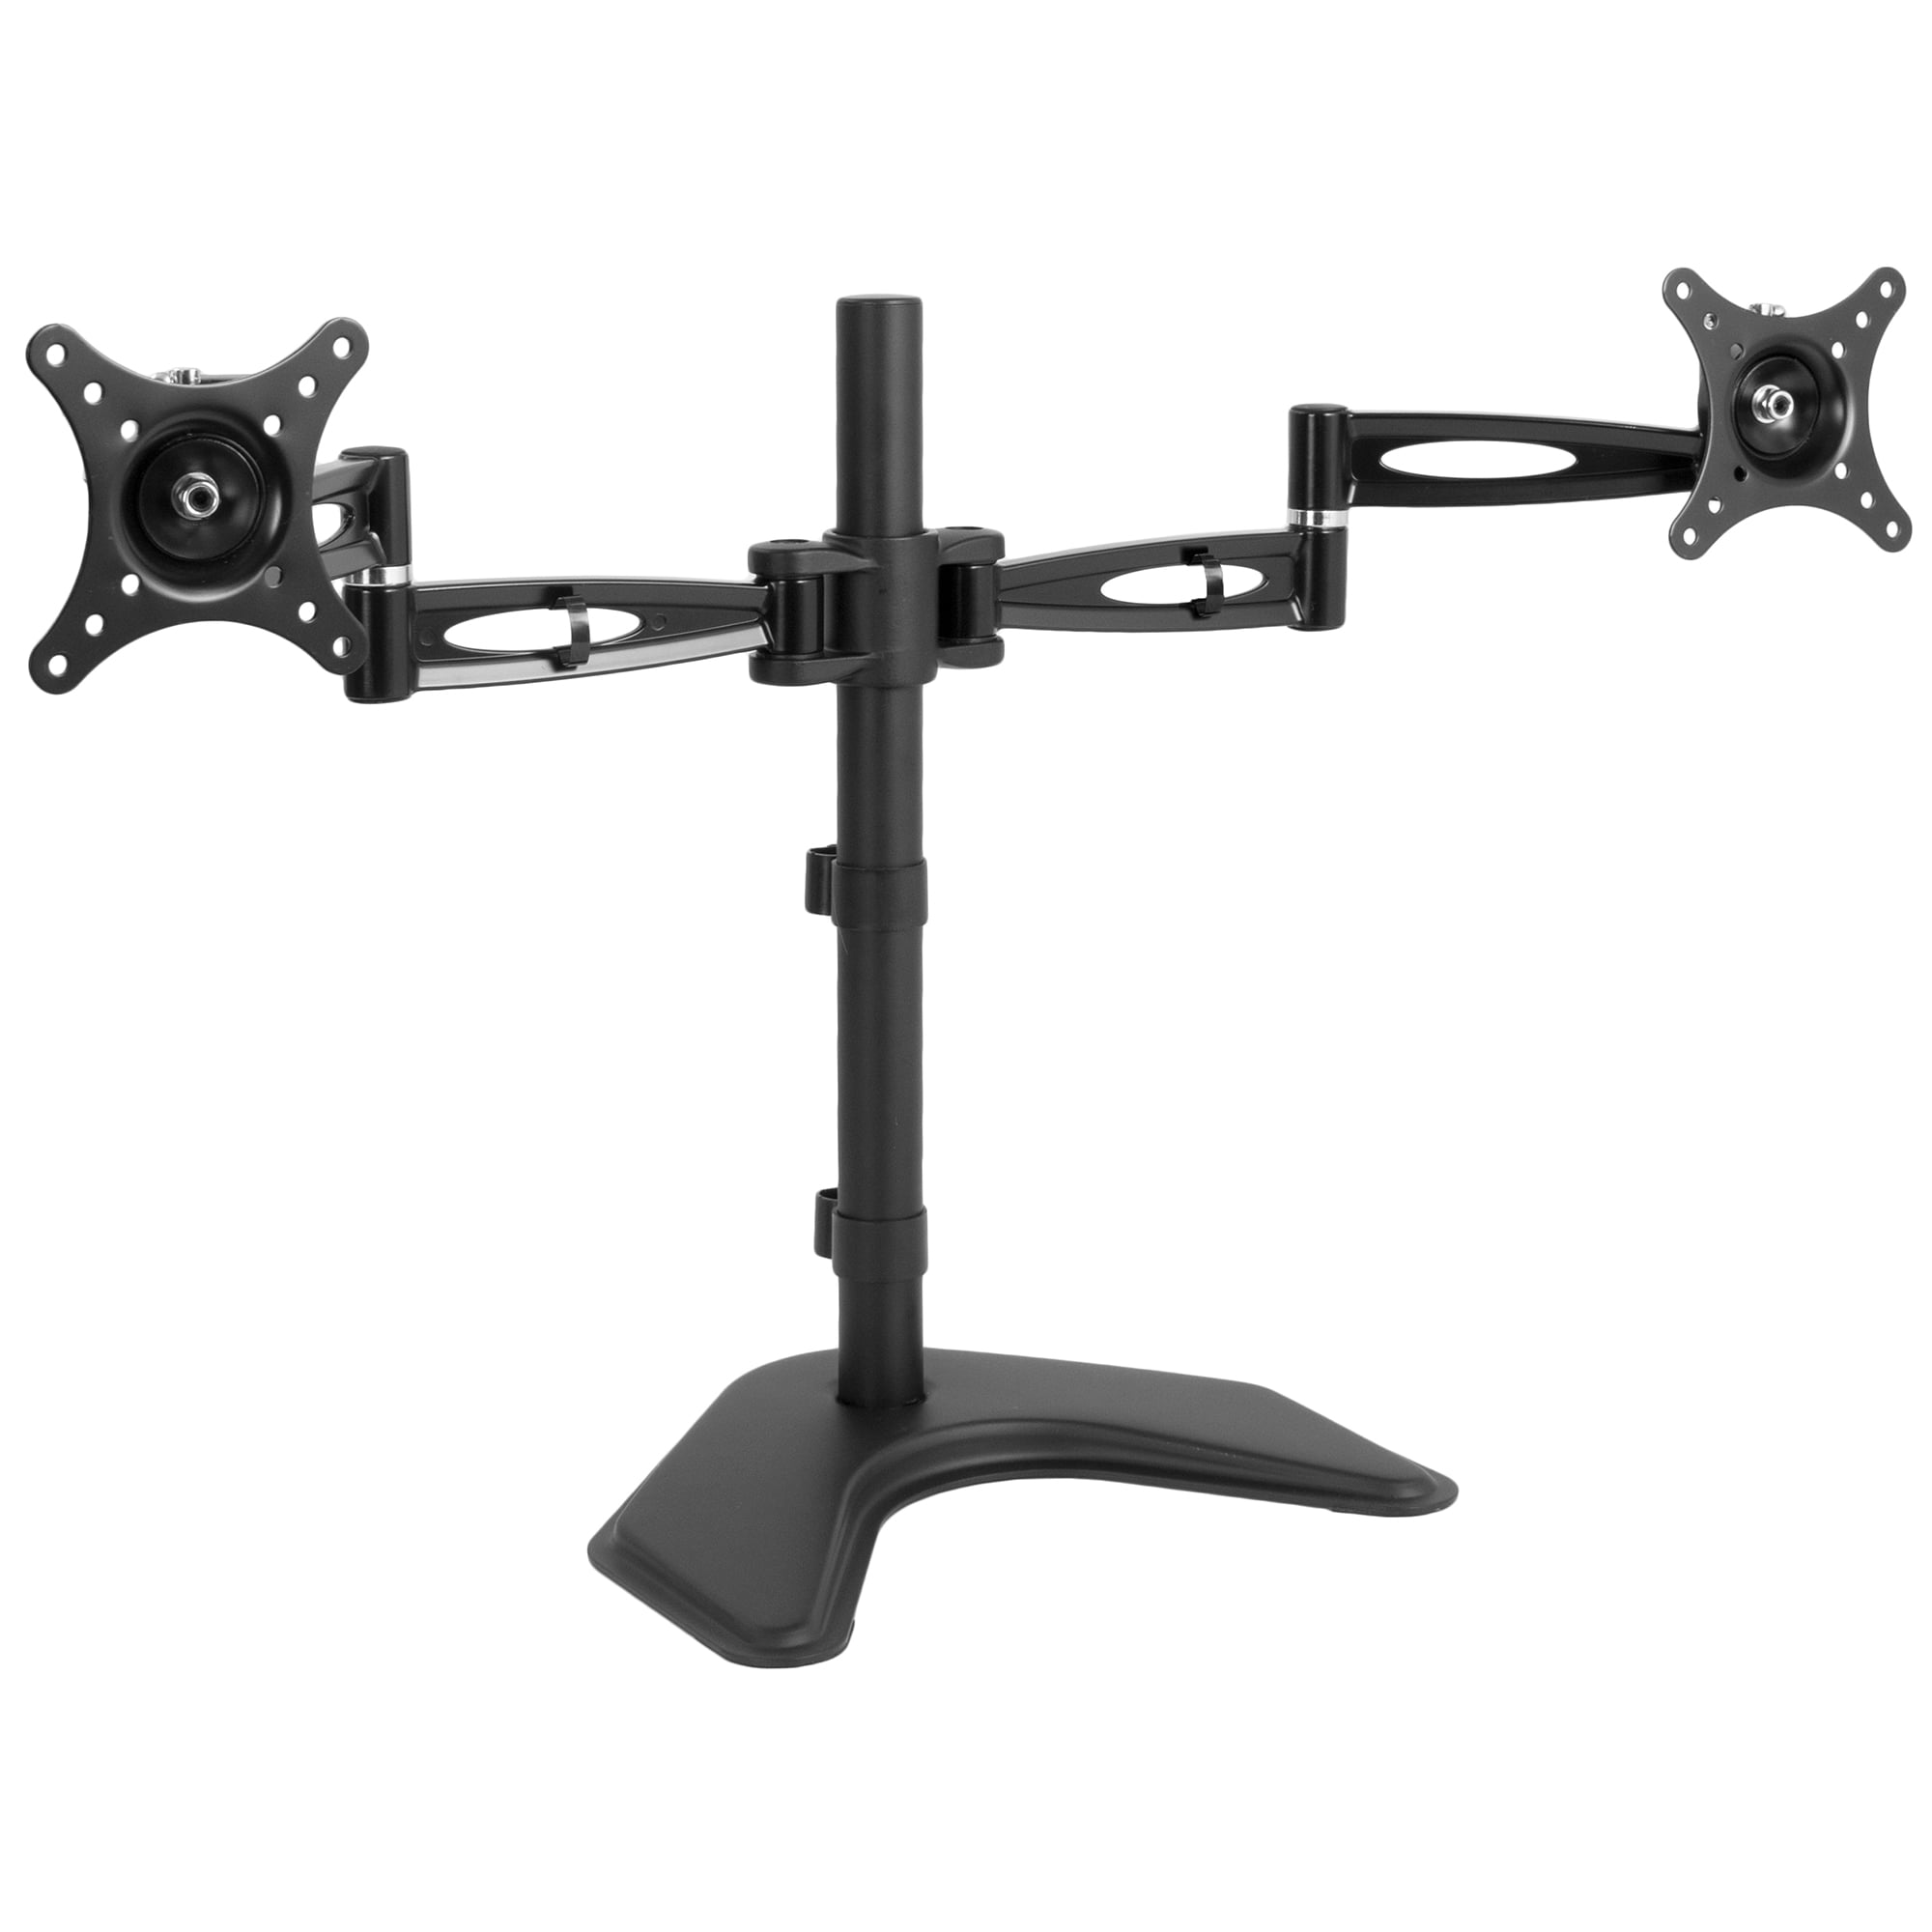 VIVO Dual LCD Monitor Desk Stand/Mount Free Standing Adjustable 2 ...